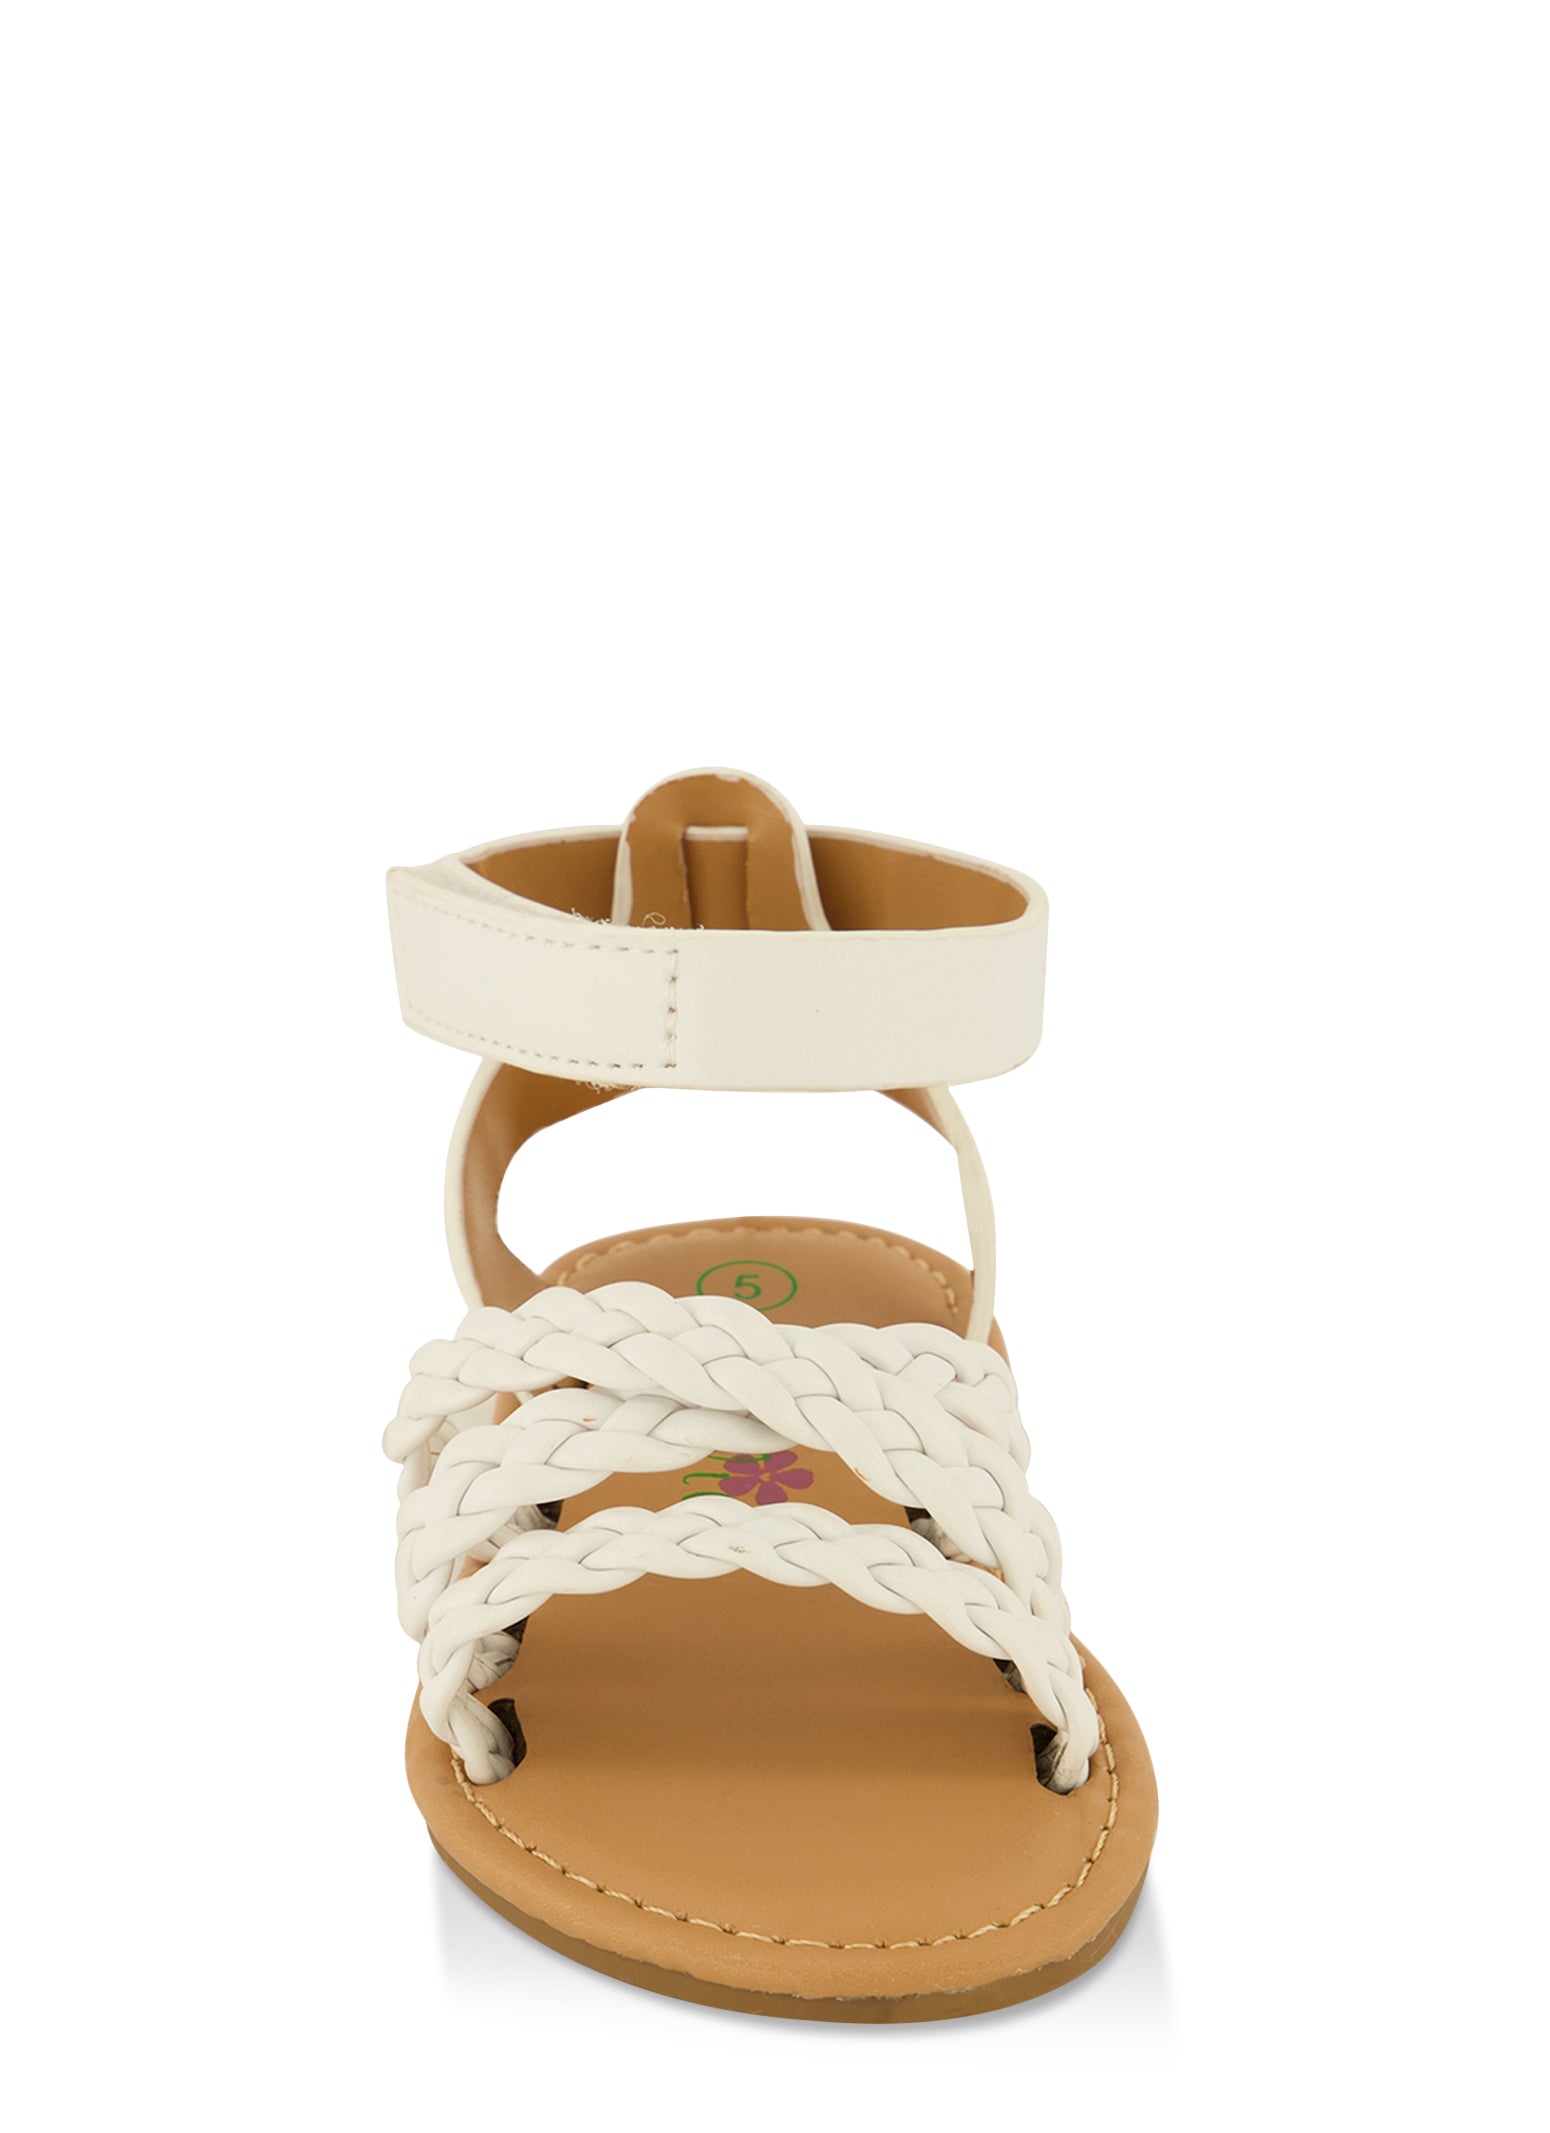 Womens Toddler Girls Braided Strappy Sandals, White, Size 5